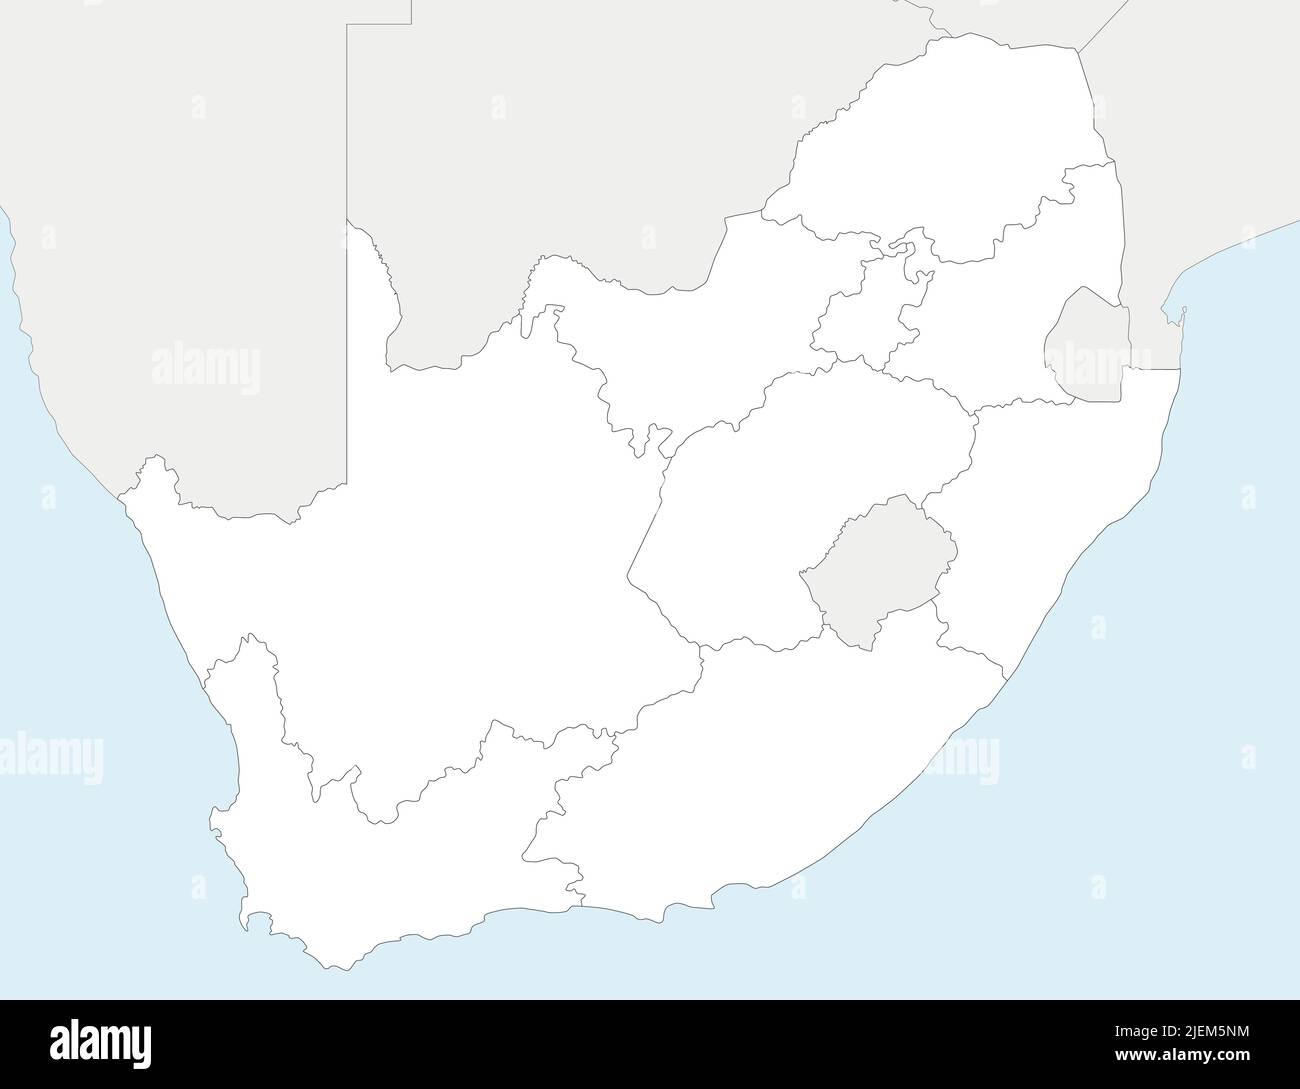 Vector blank map of South Africa with provinces and administrative divisions, and neighbouring countries. Editable and clearly labeled layers. Stock Vector